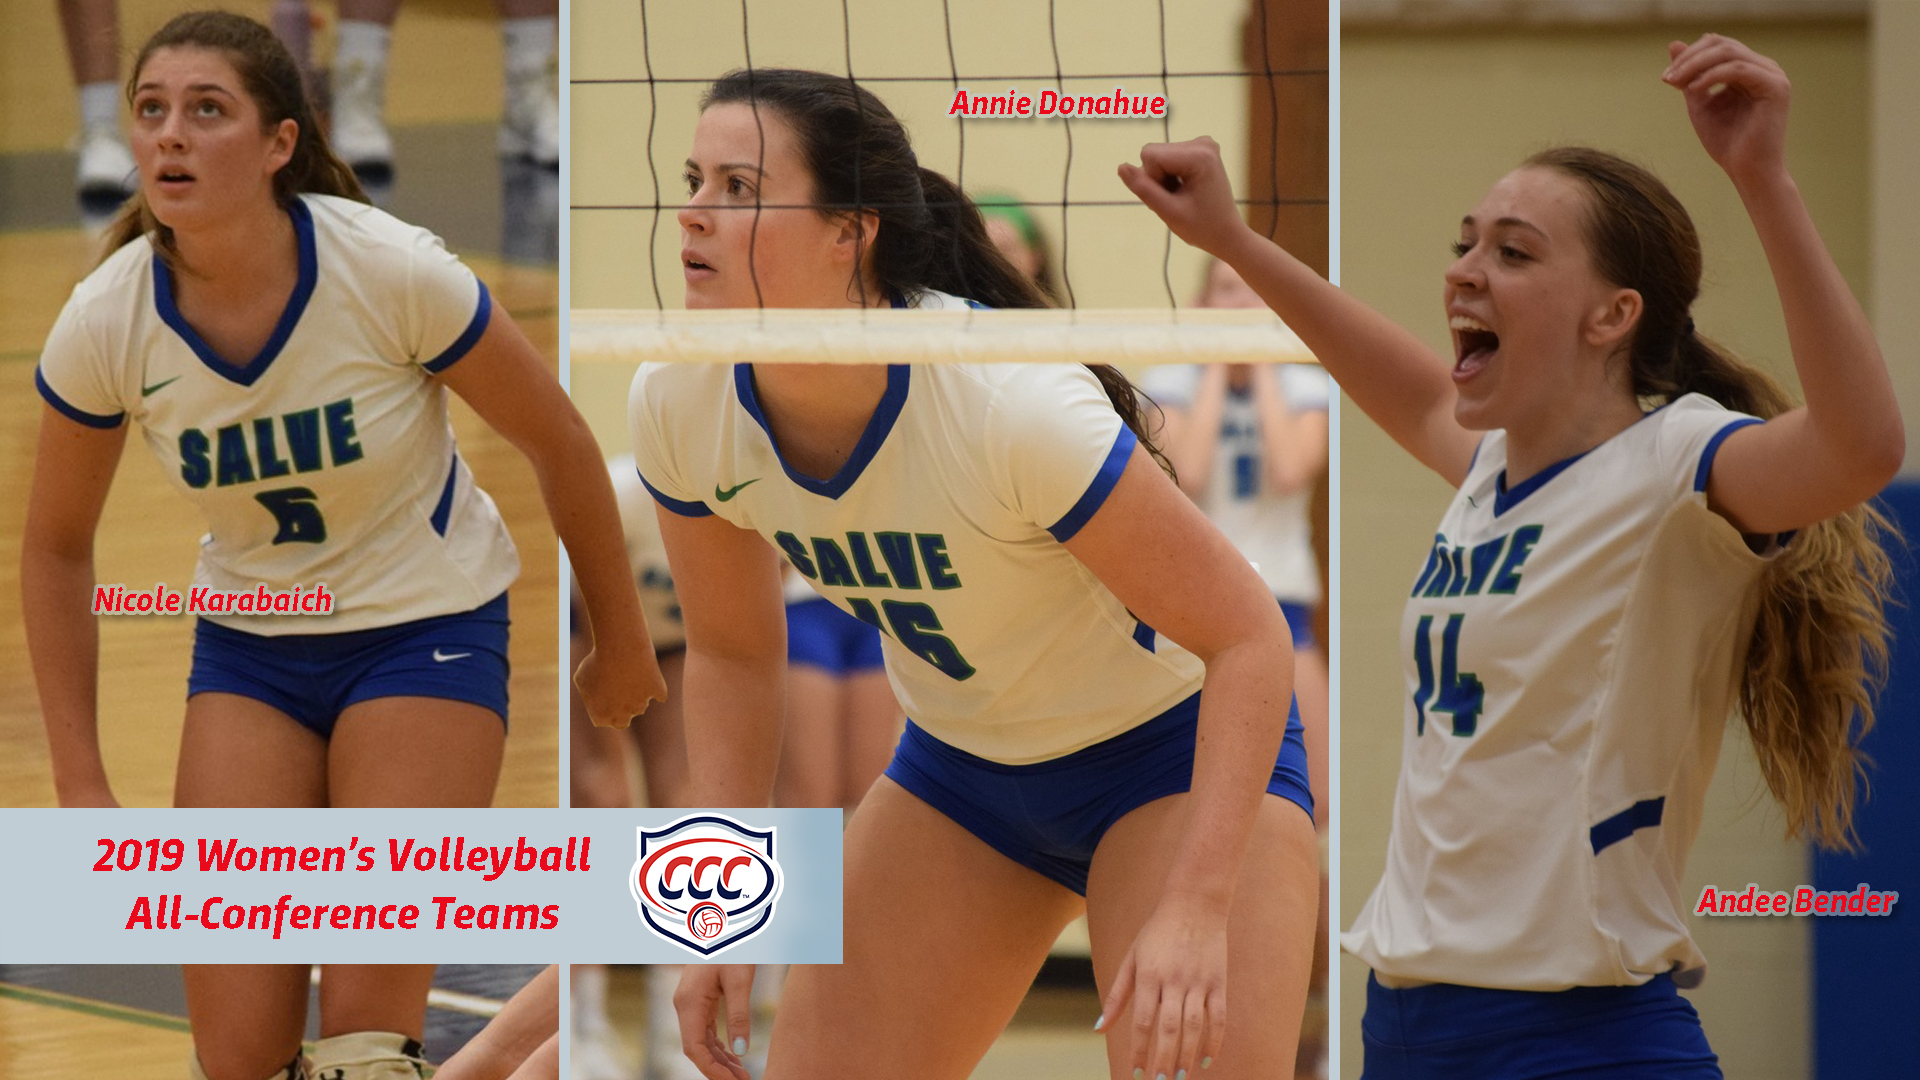 Nicole Karabaich, Annie Donahue, and Andee Bender (l-r) earned All-CCC honors.